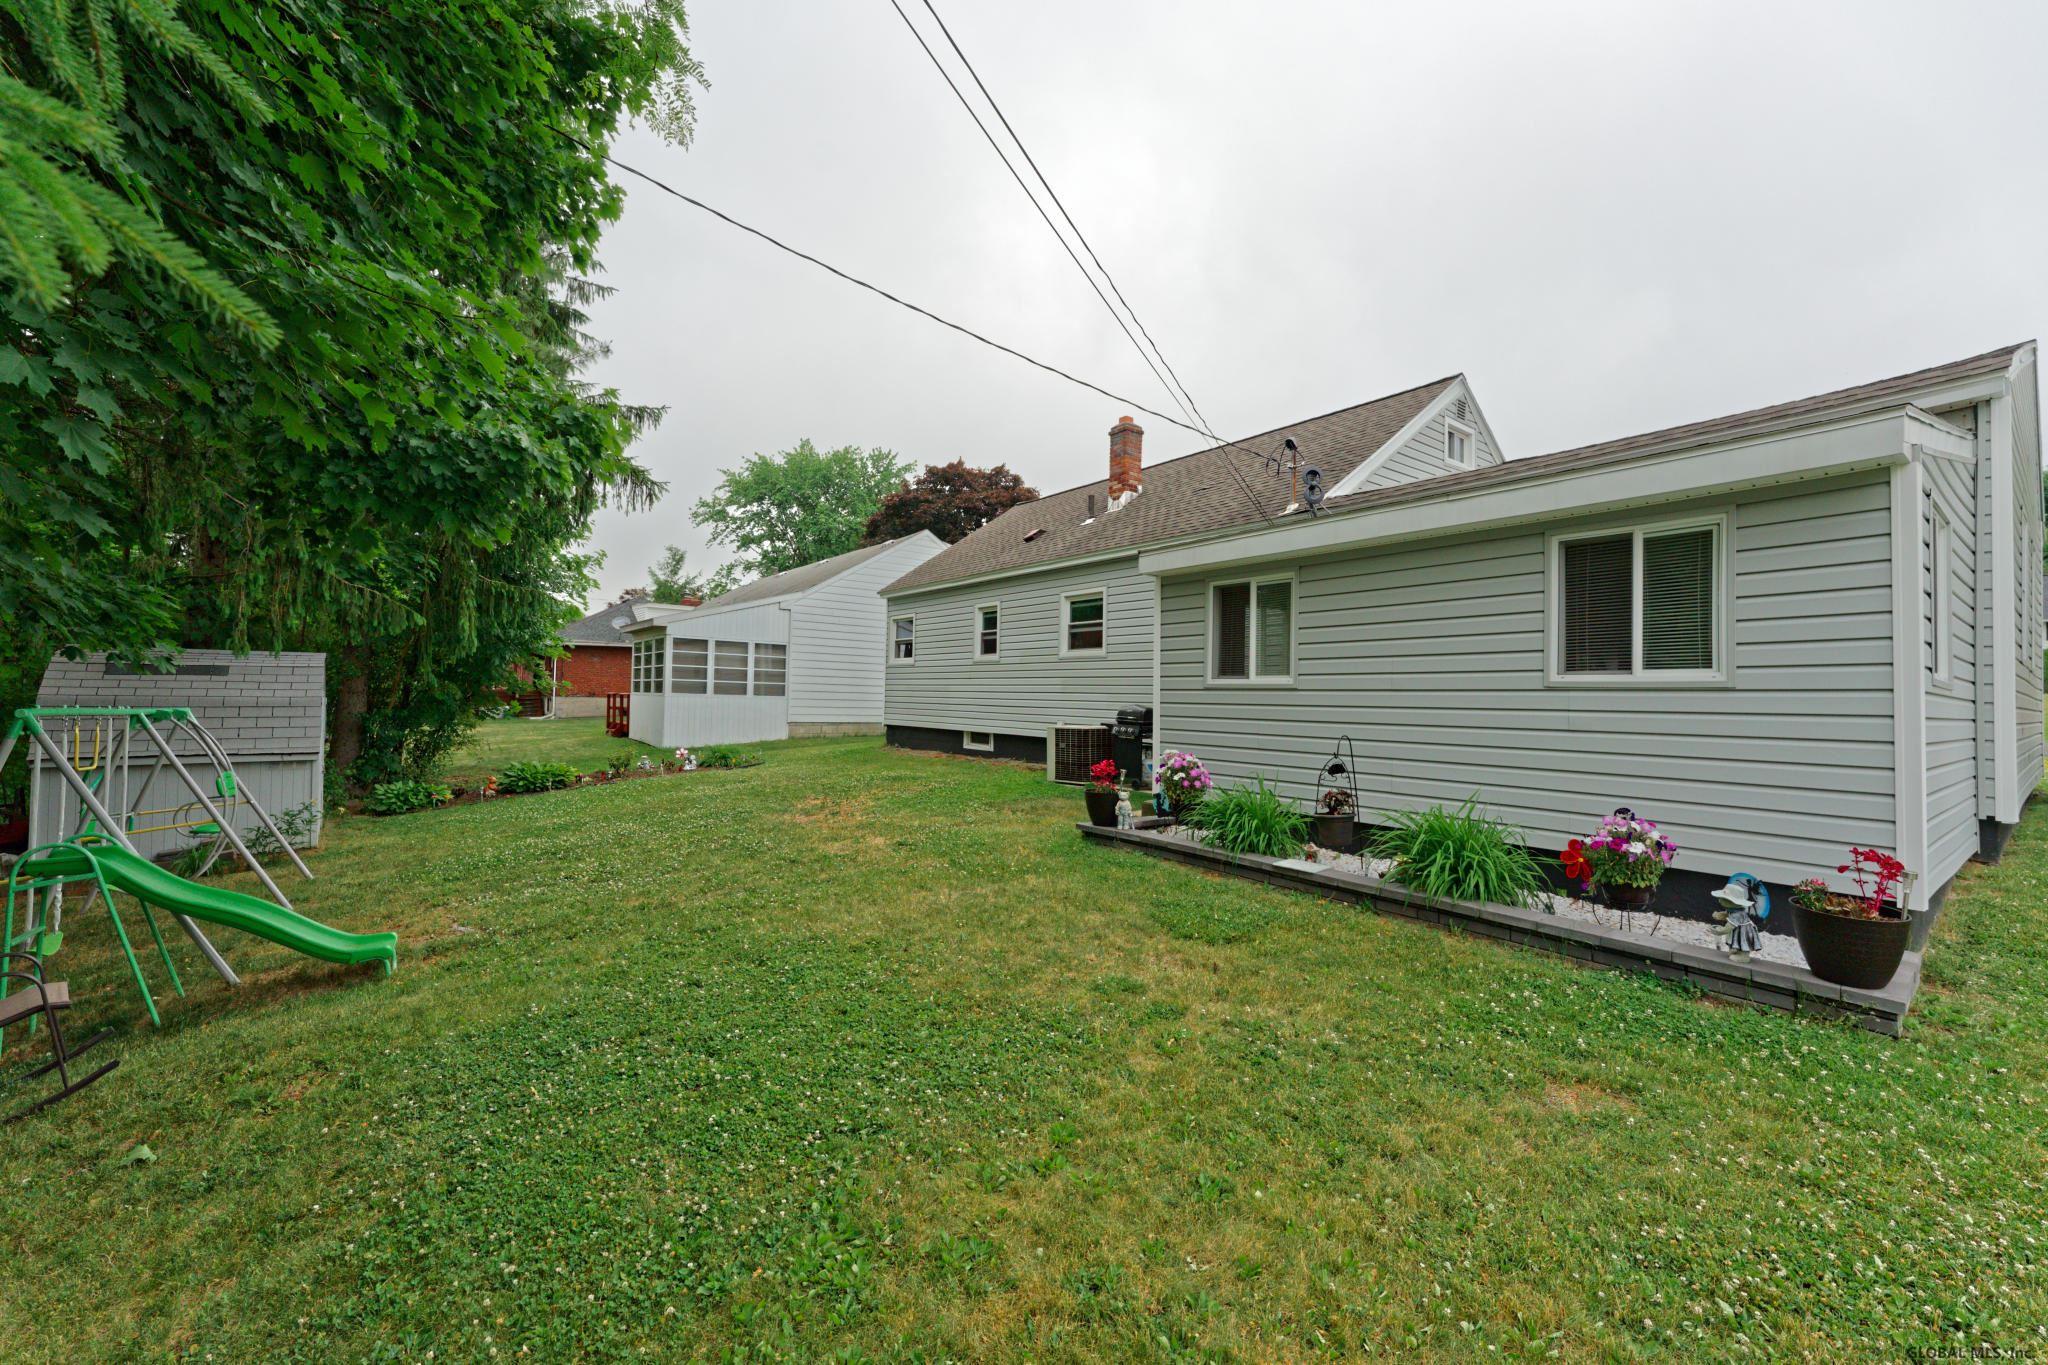 2111 Van Rensselaer Dr In Schenectady Ny Listed For